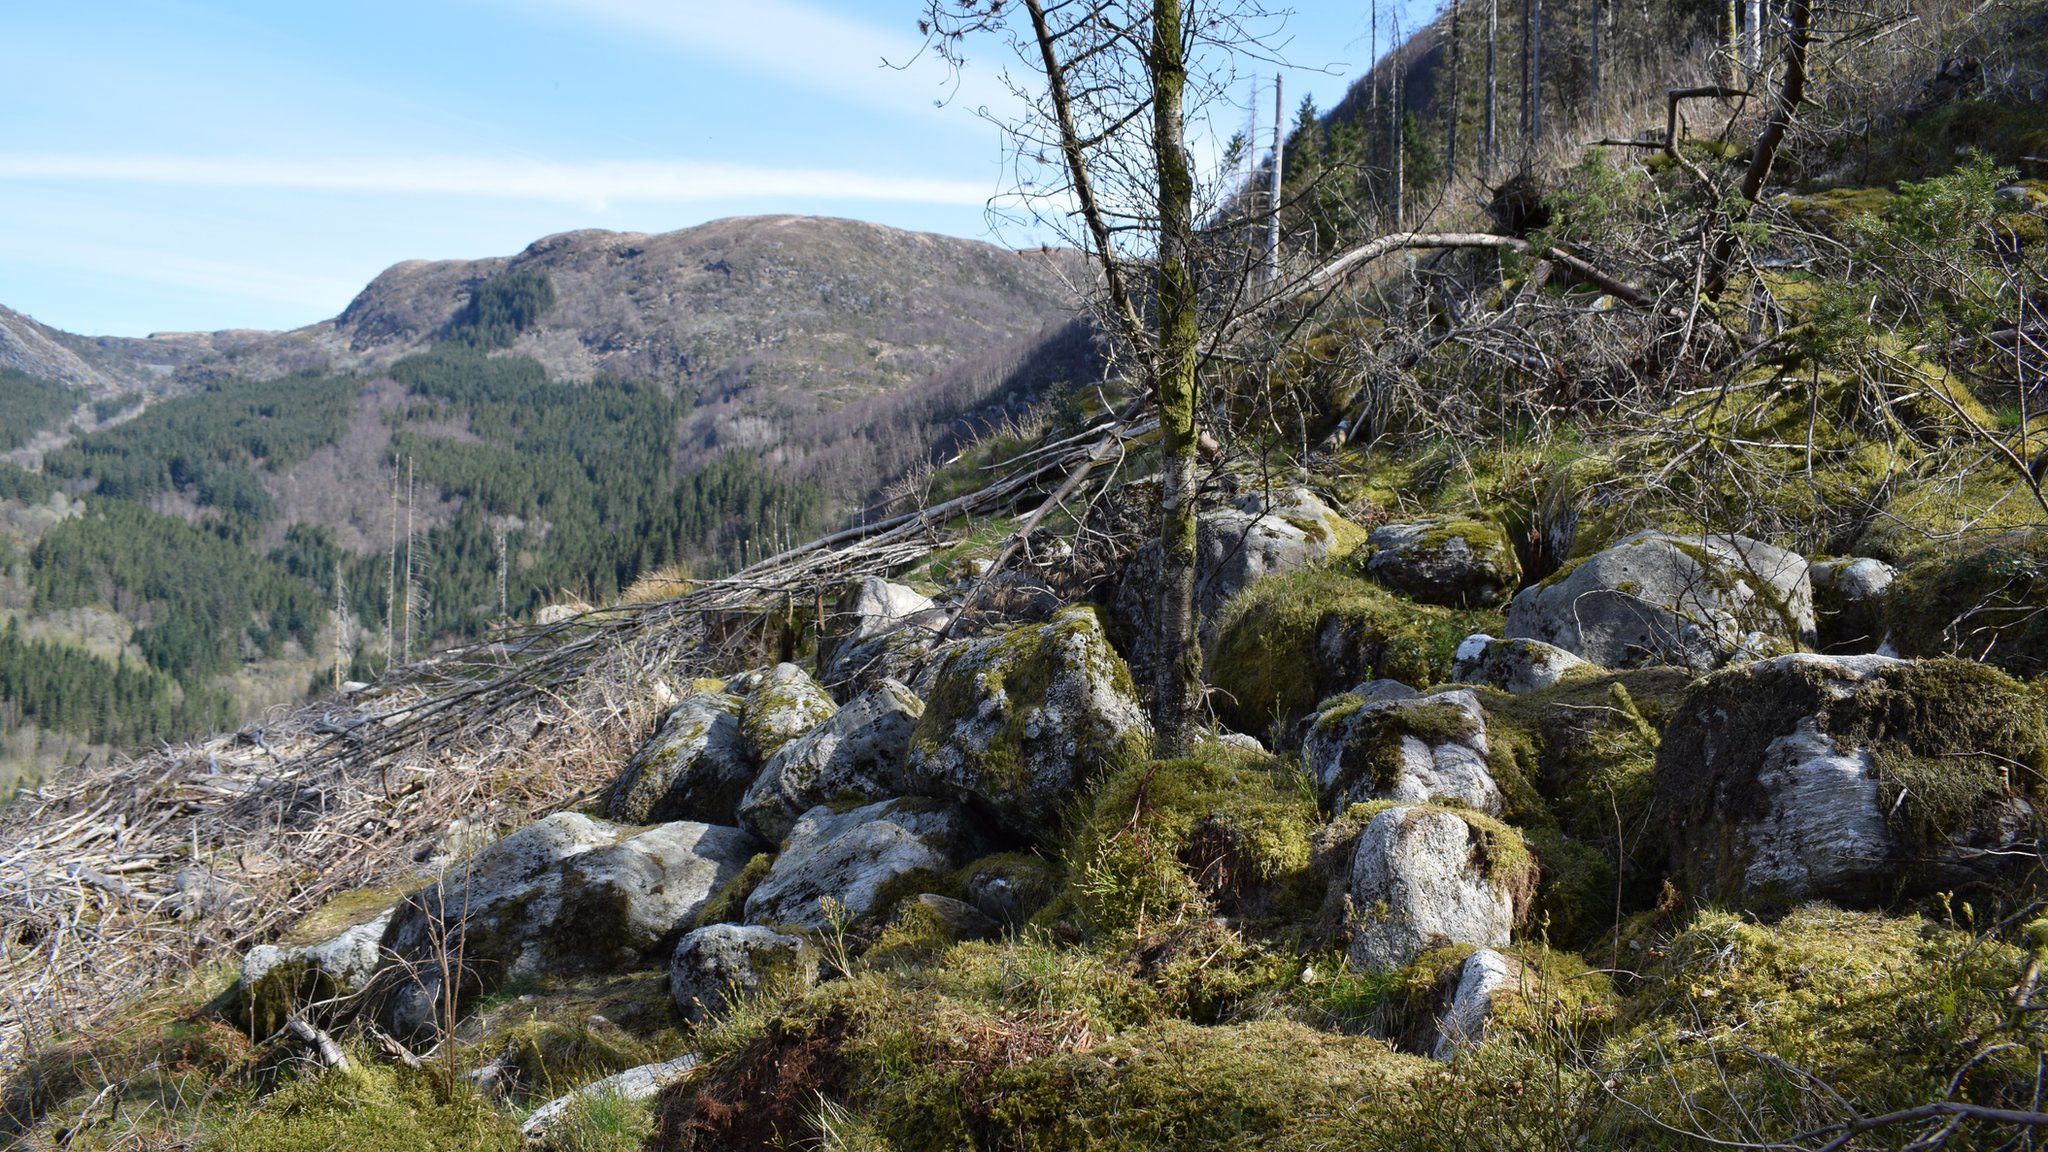 A view of some rocks on the Isdalen Valley, where the Isdal Woman was thought to have been found in 1970